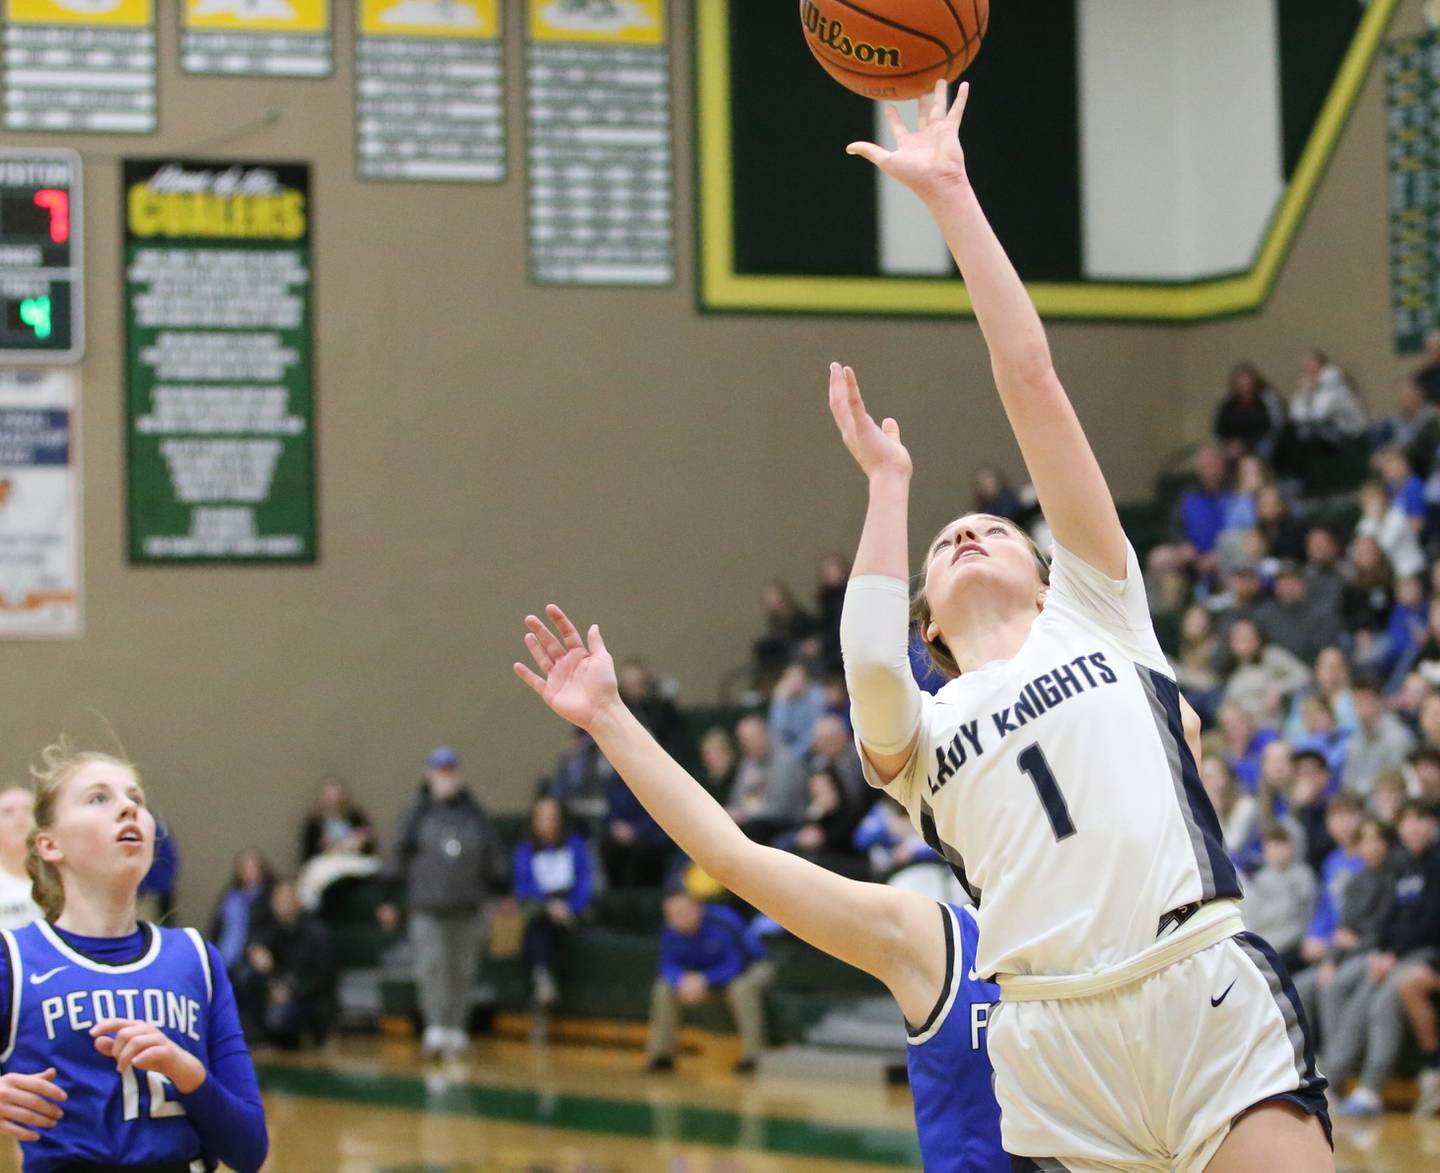 Fieldcrest's Carolyn Megrow sneaks by Peotone's Ashley Renwick to score a bucket during the Class 2A Sectional final on Thursday, Feb. 20, 2023 at Coal City High School.